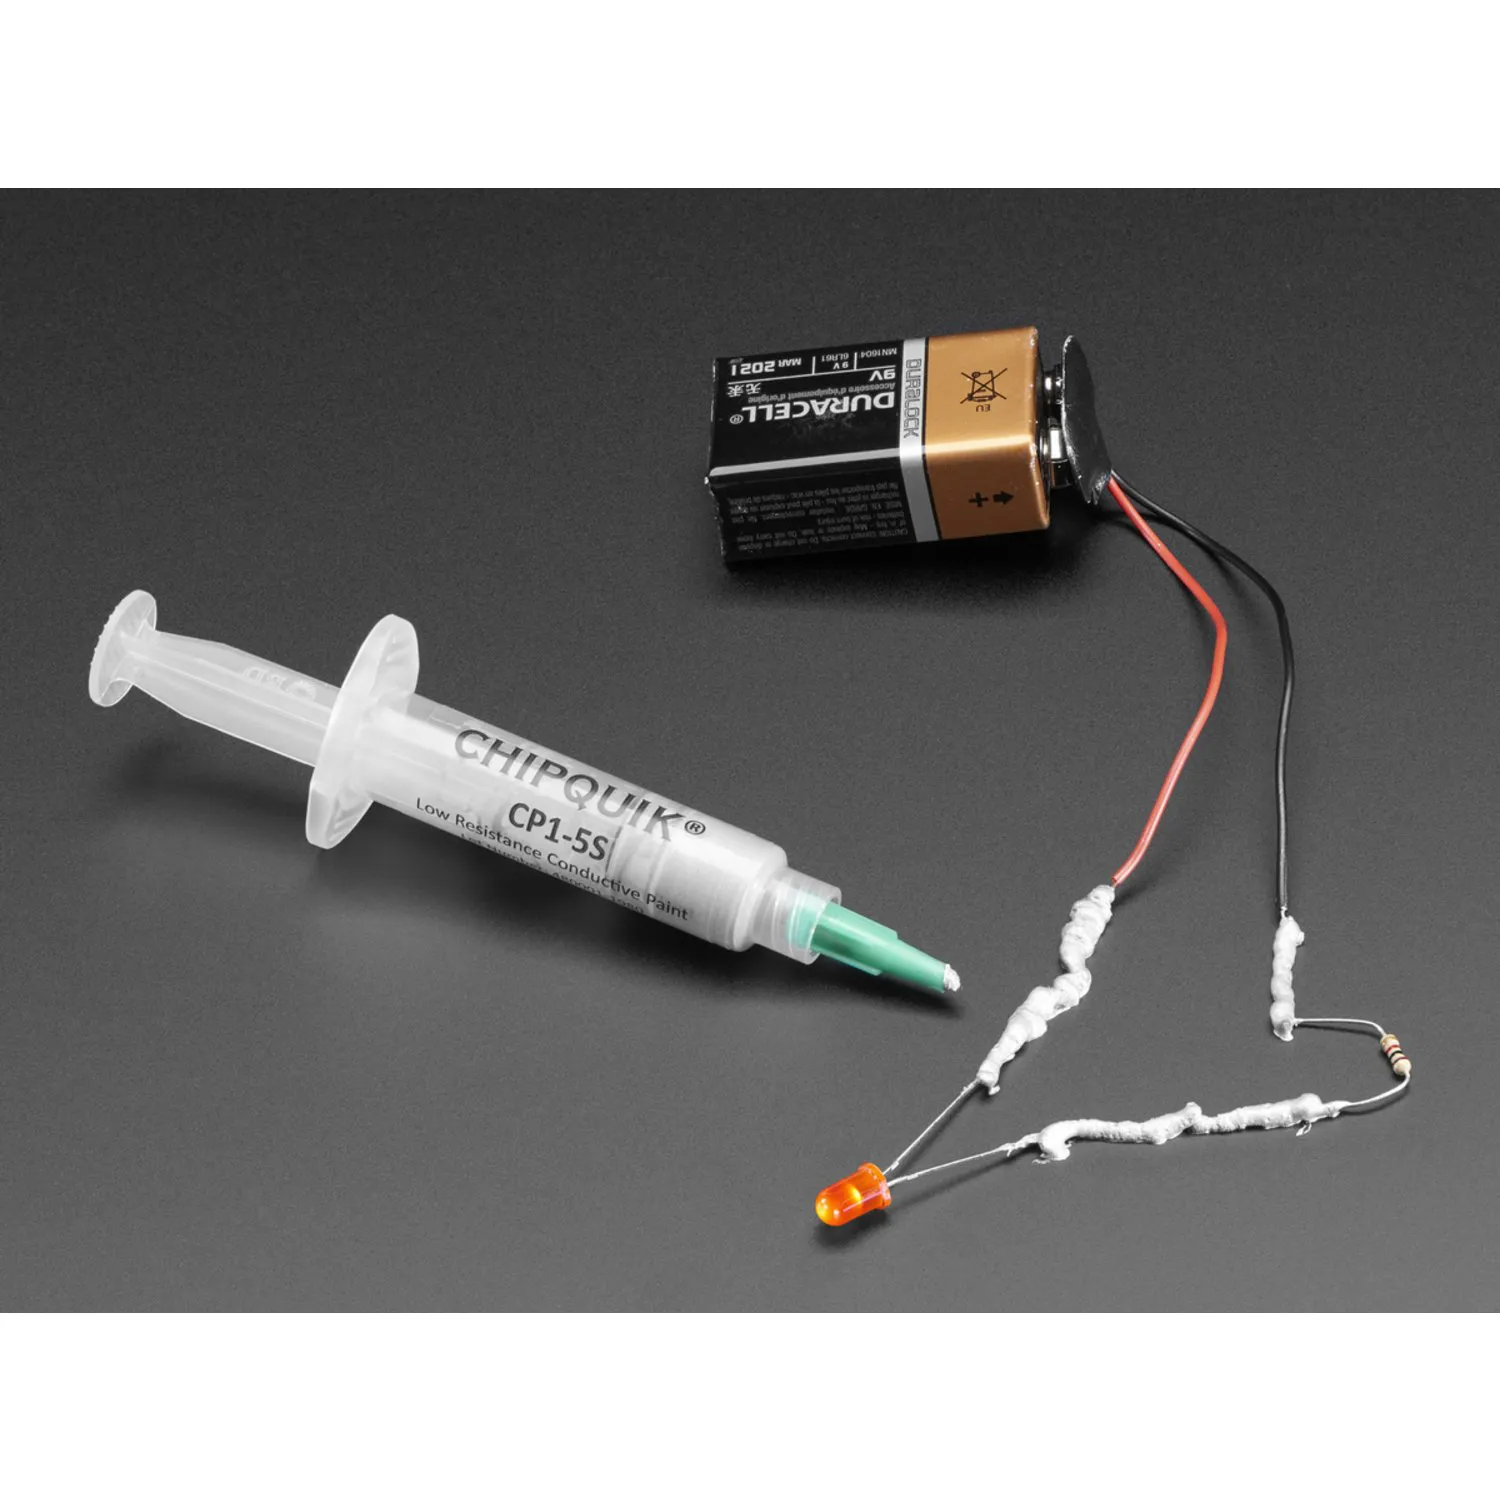 Photo of Chip Quik Conductive Paint Kit with Plunger and Tips - 5 Grams [CP1-5S]